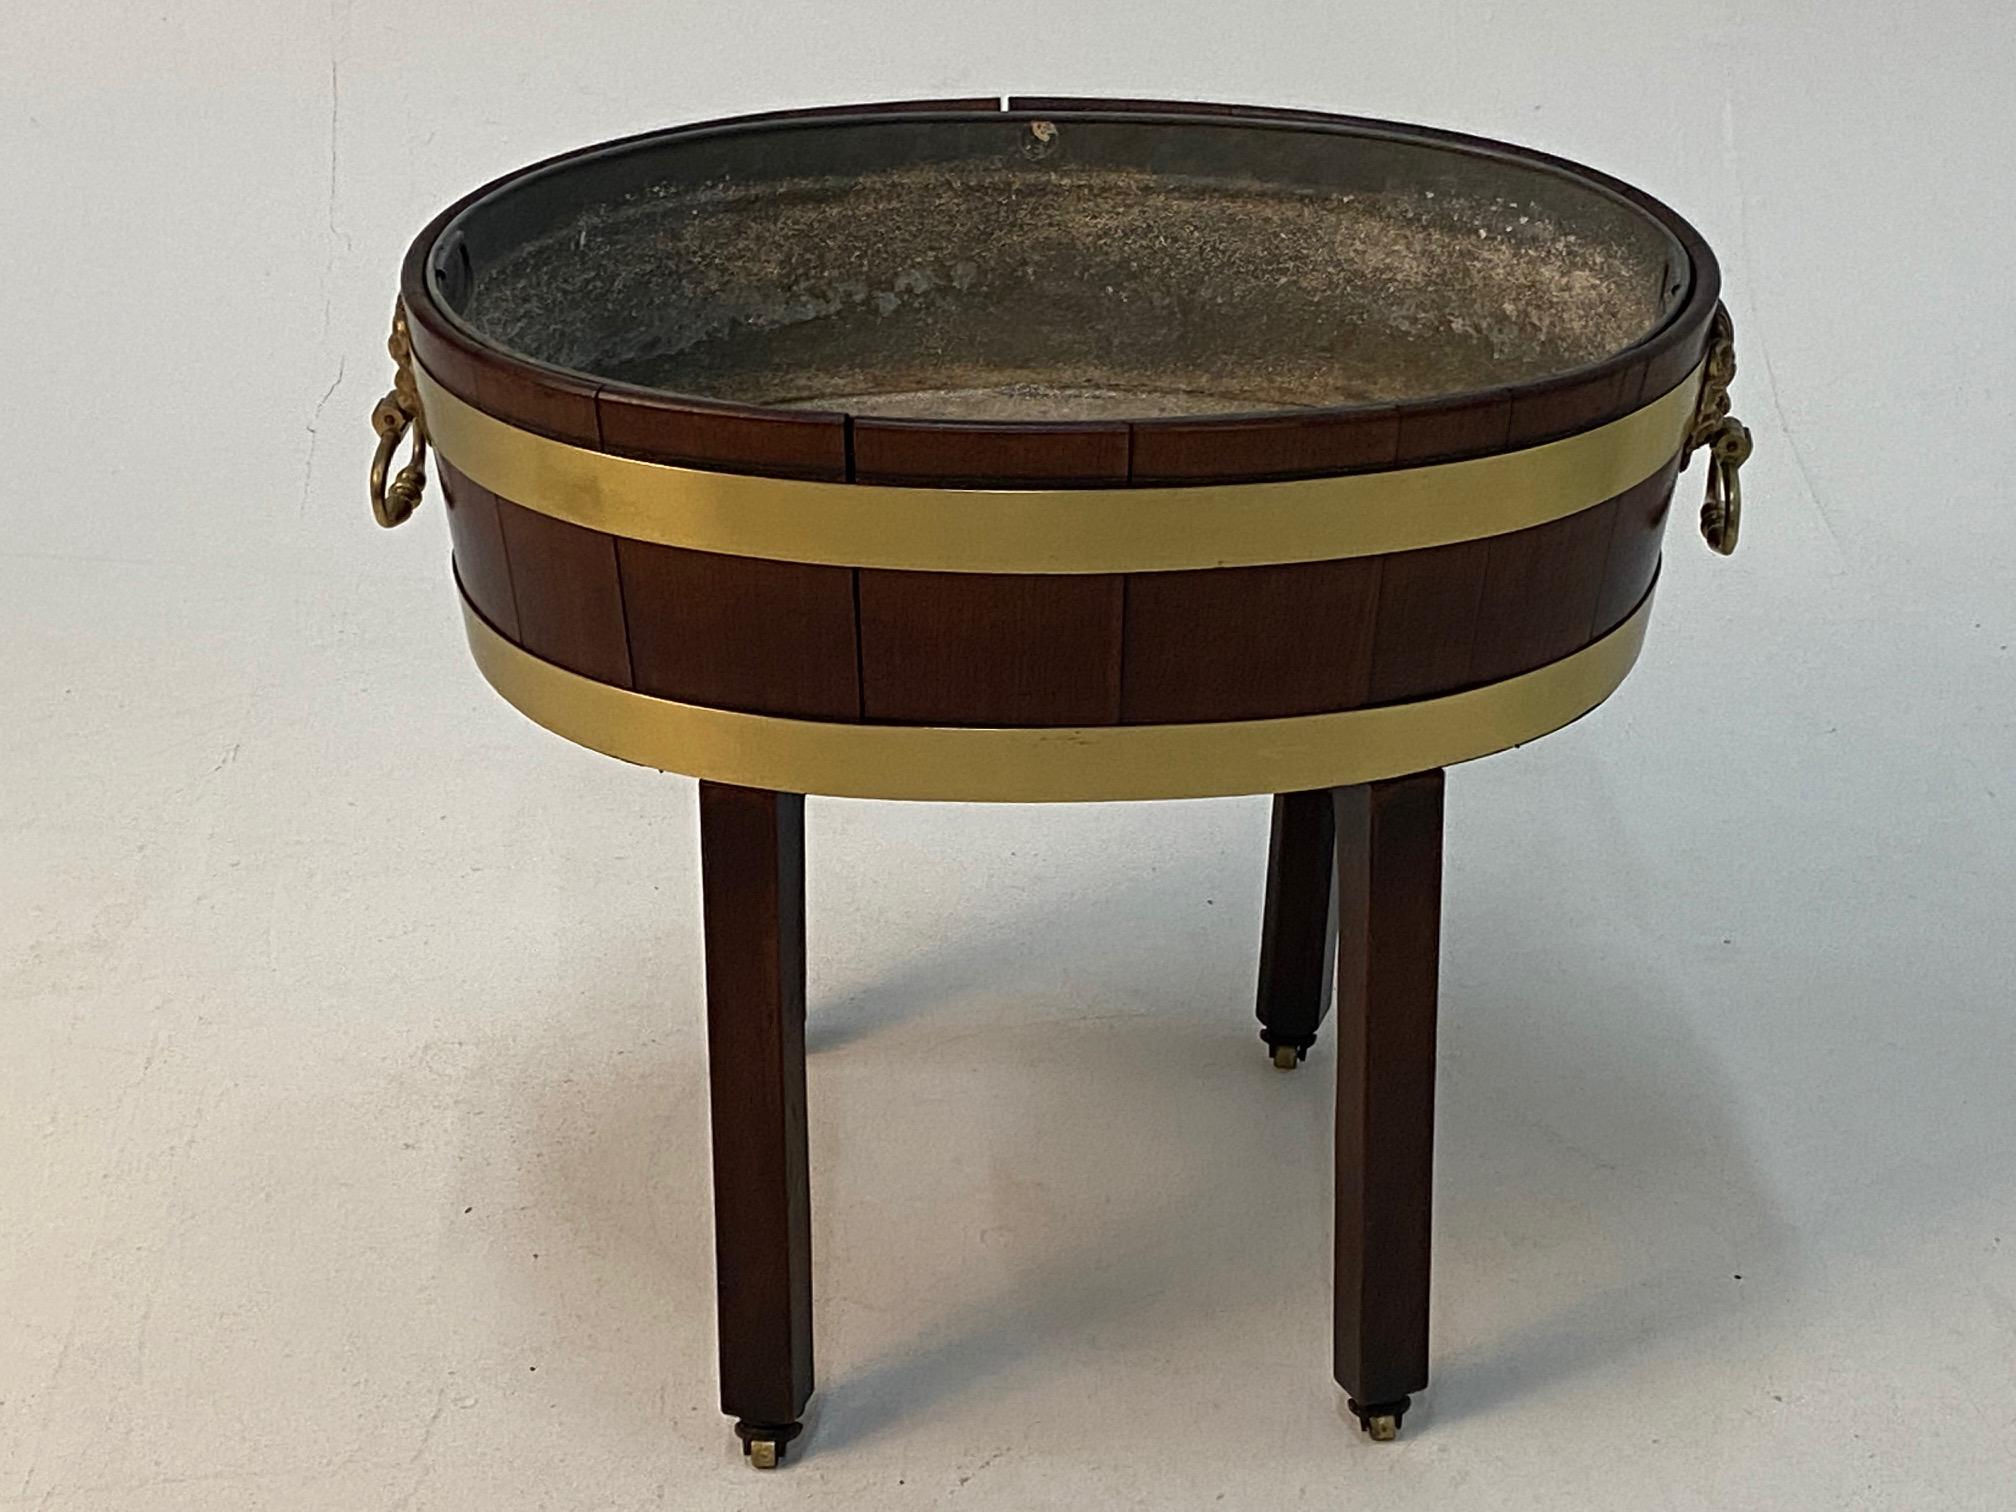 A beautiful antique English Georgian style oval mahogany cellarette on stand having handsome brass banding and figural handles with detailed lion or gargoyle-esque hardware. Legs terminate in brass casters and original metal liner is